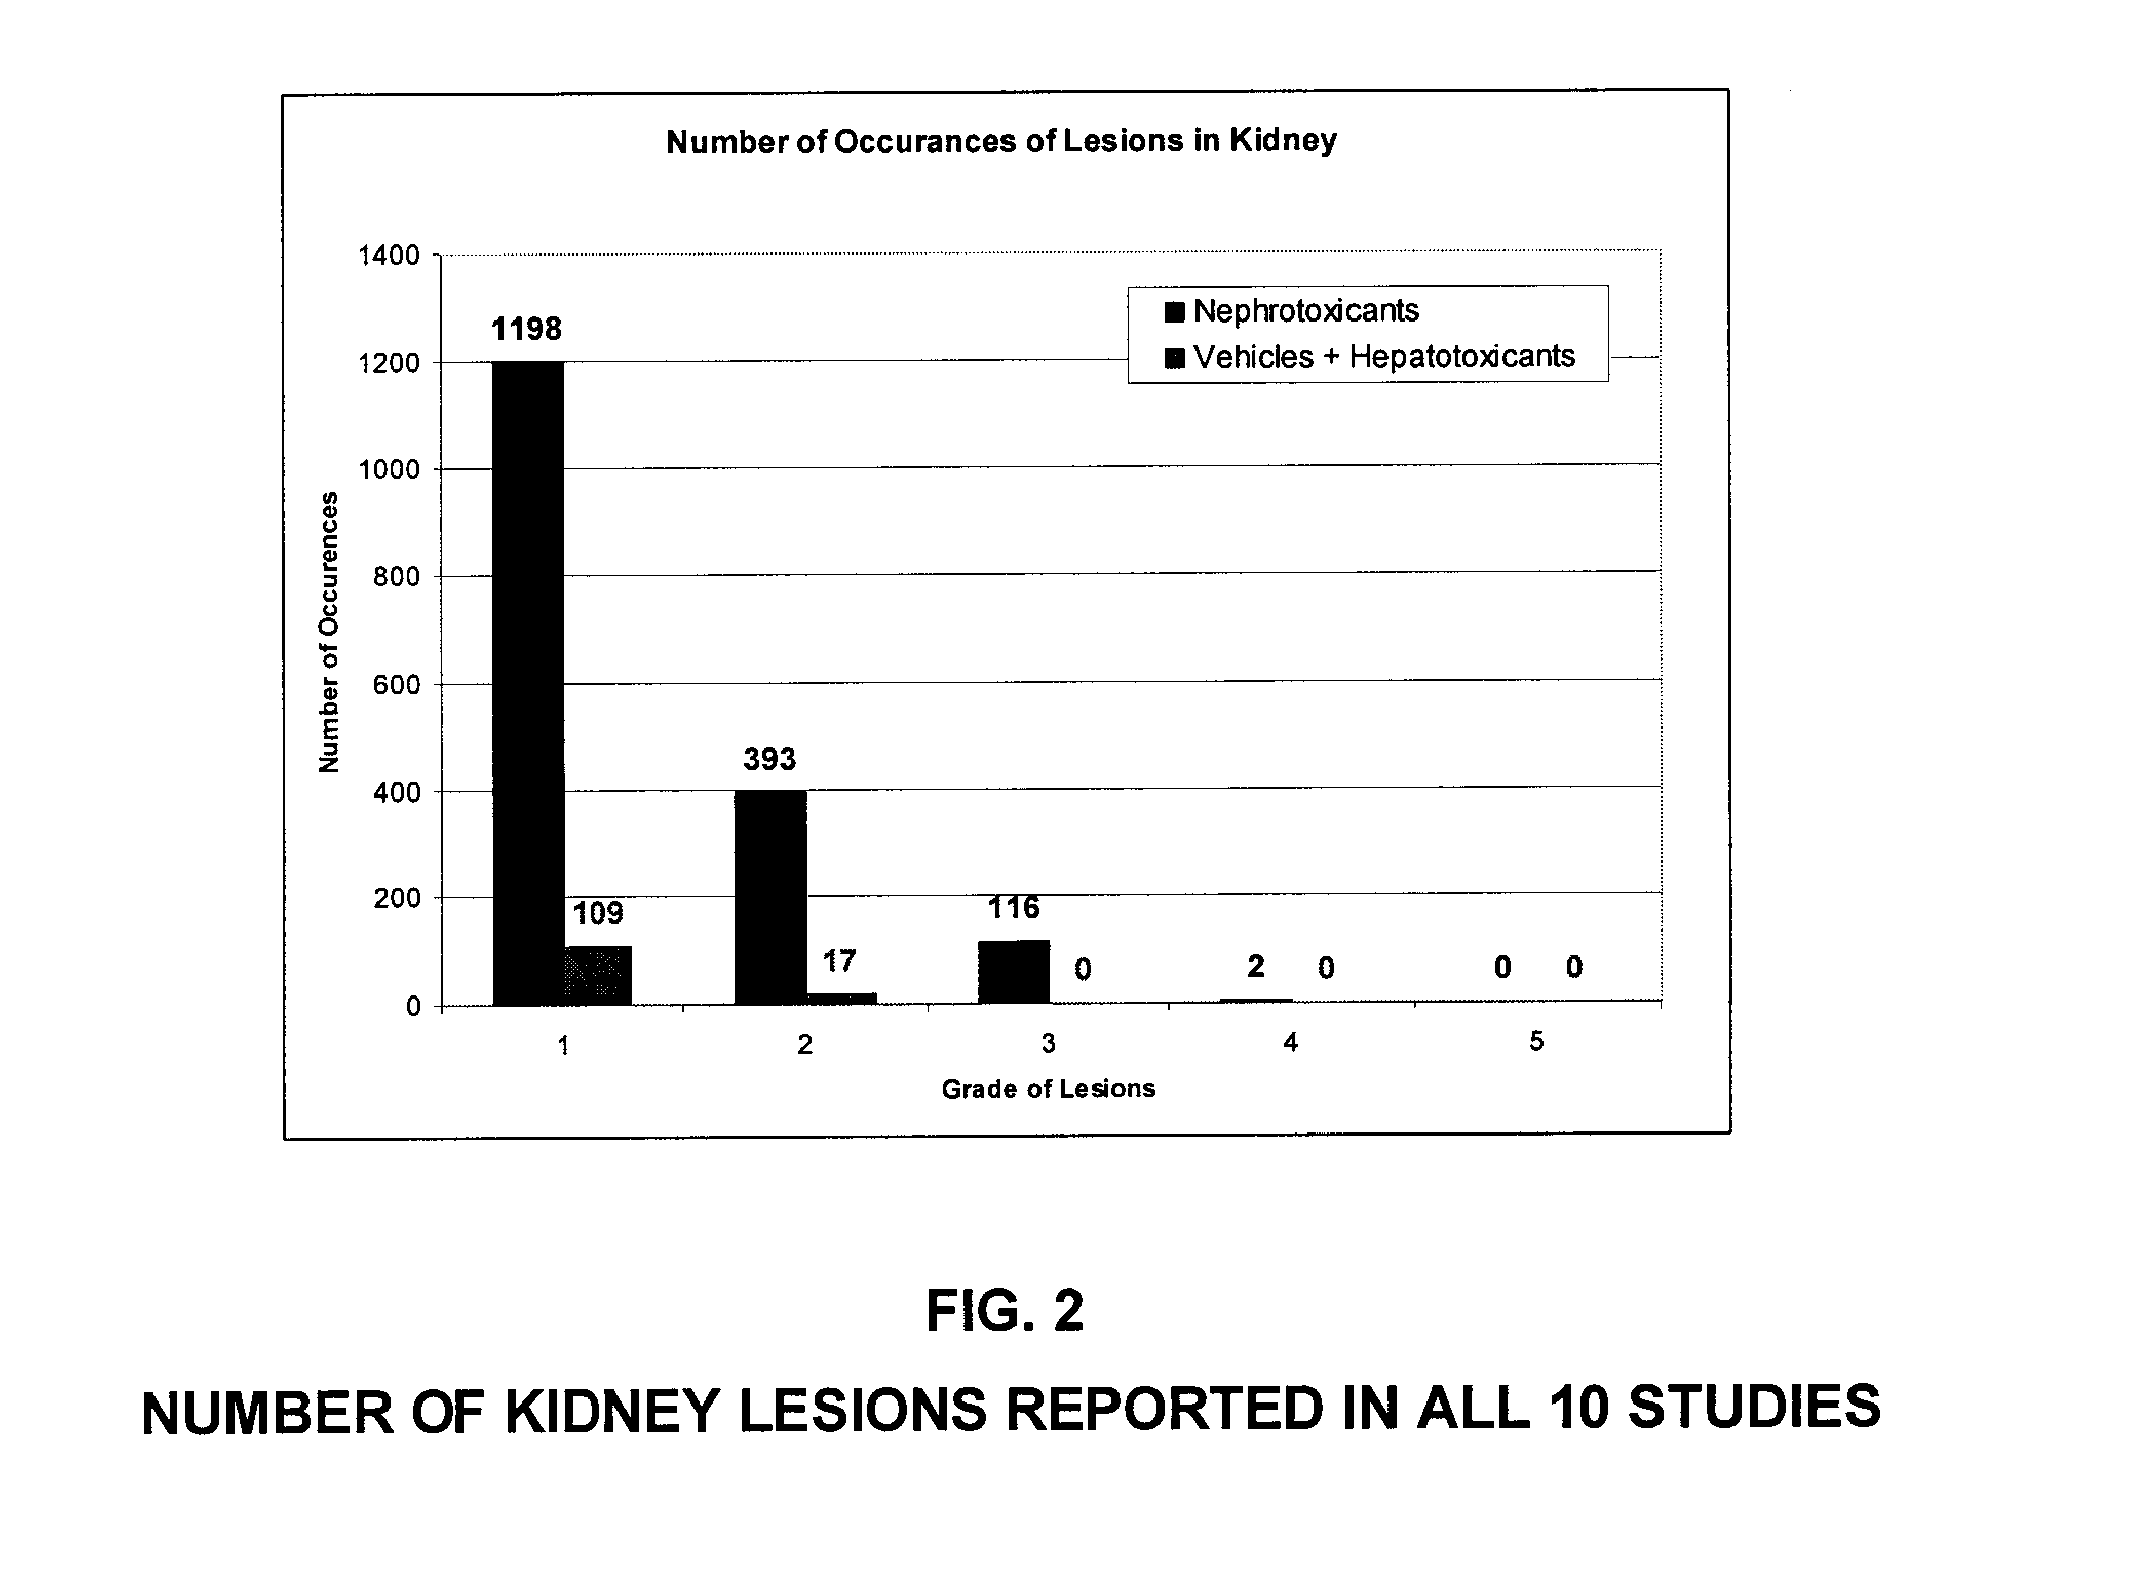 Predictive renal safety biomarkers and biomarker signatures to monitor kidney function